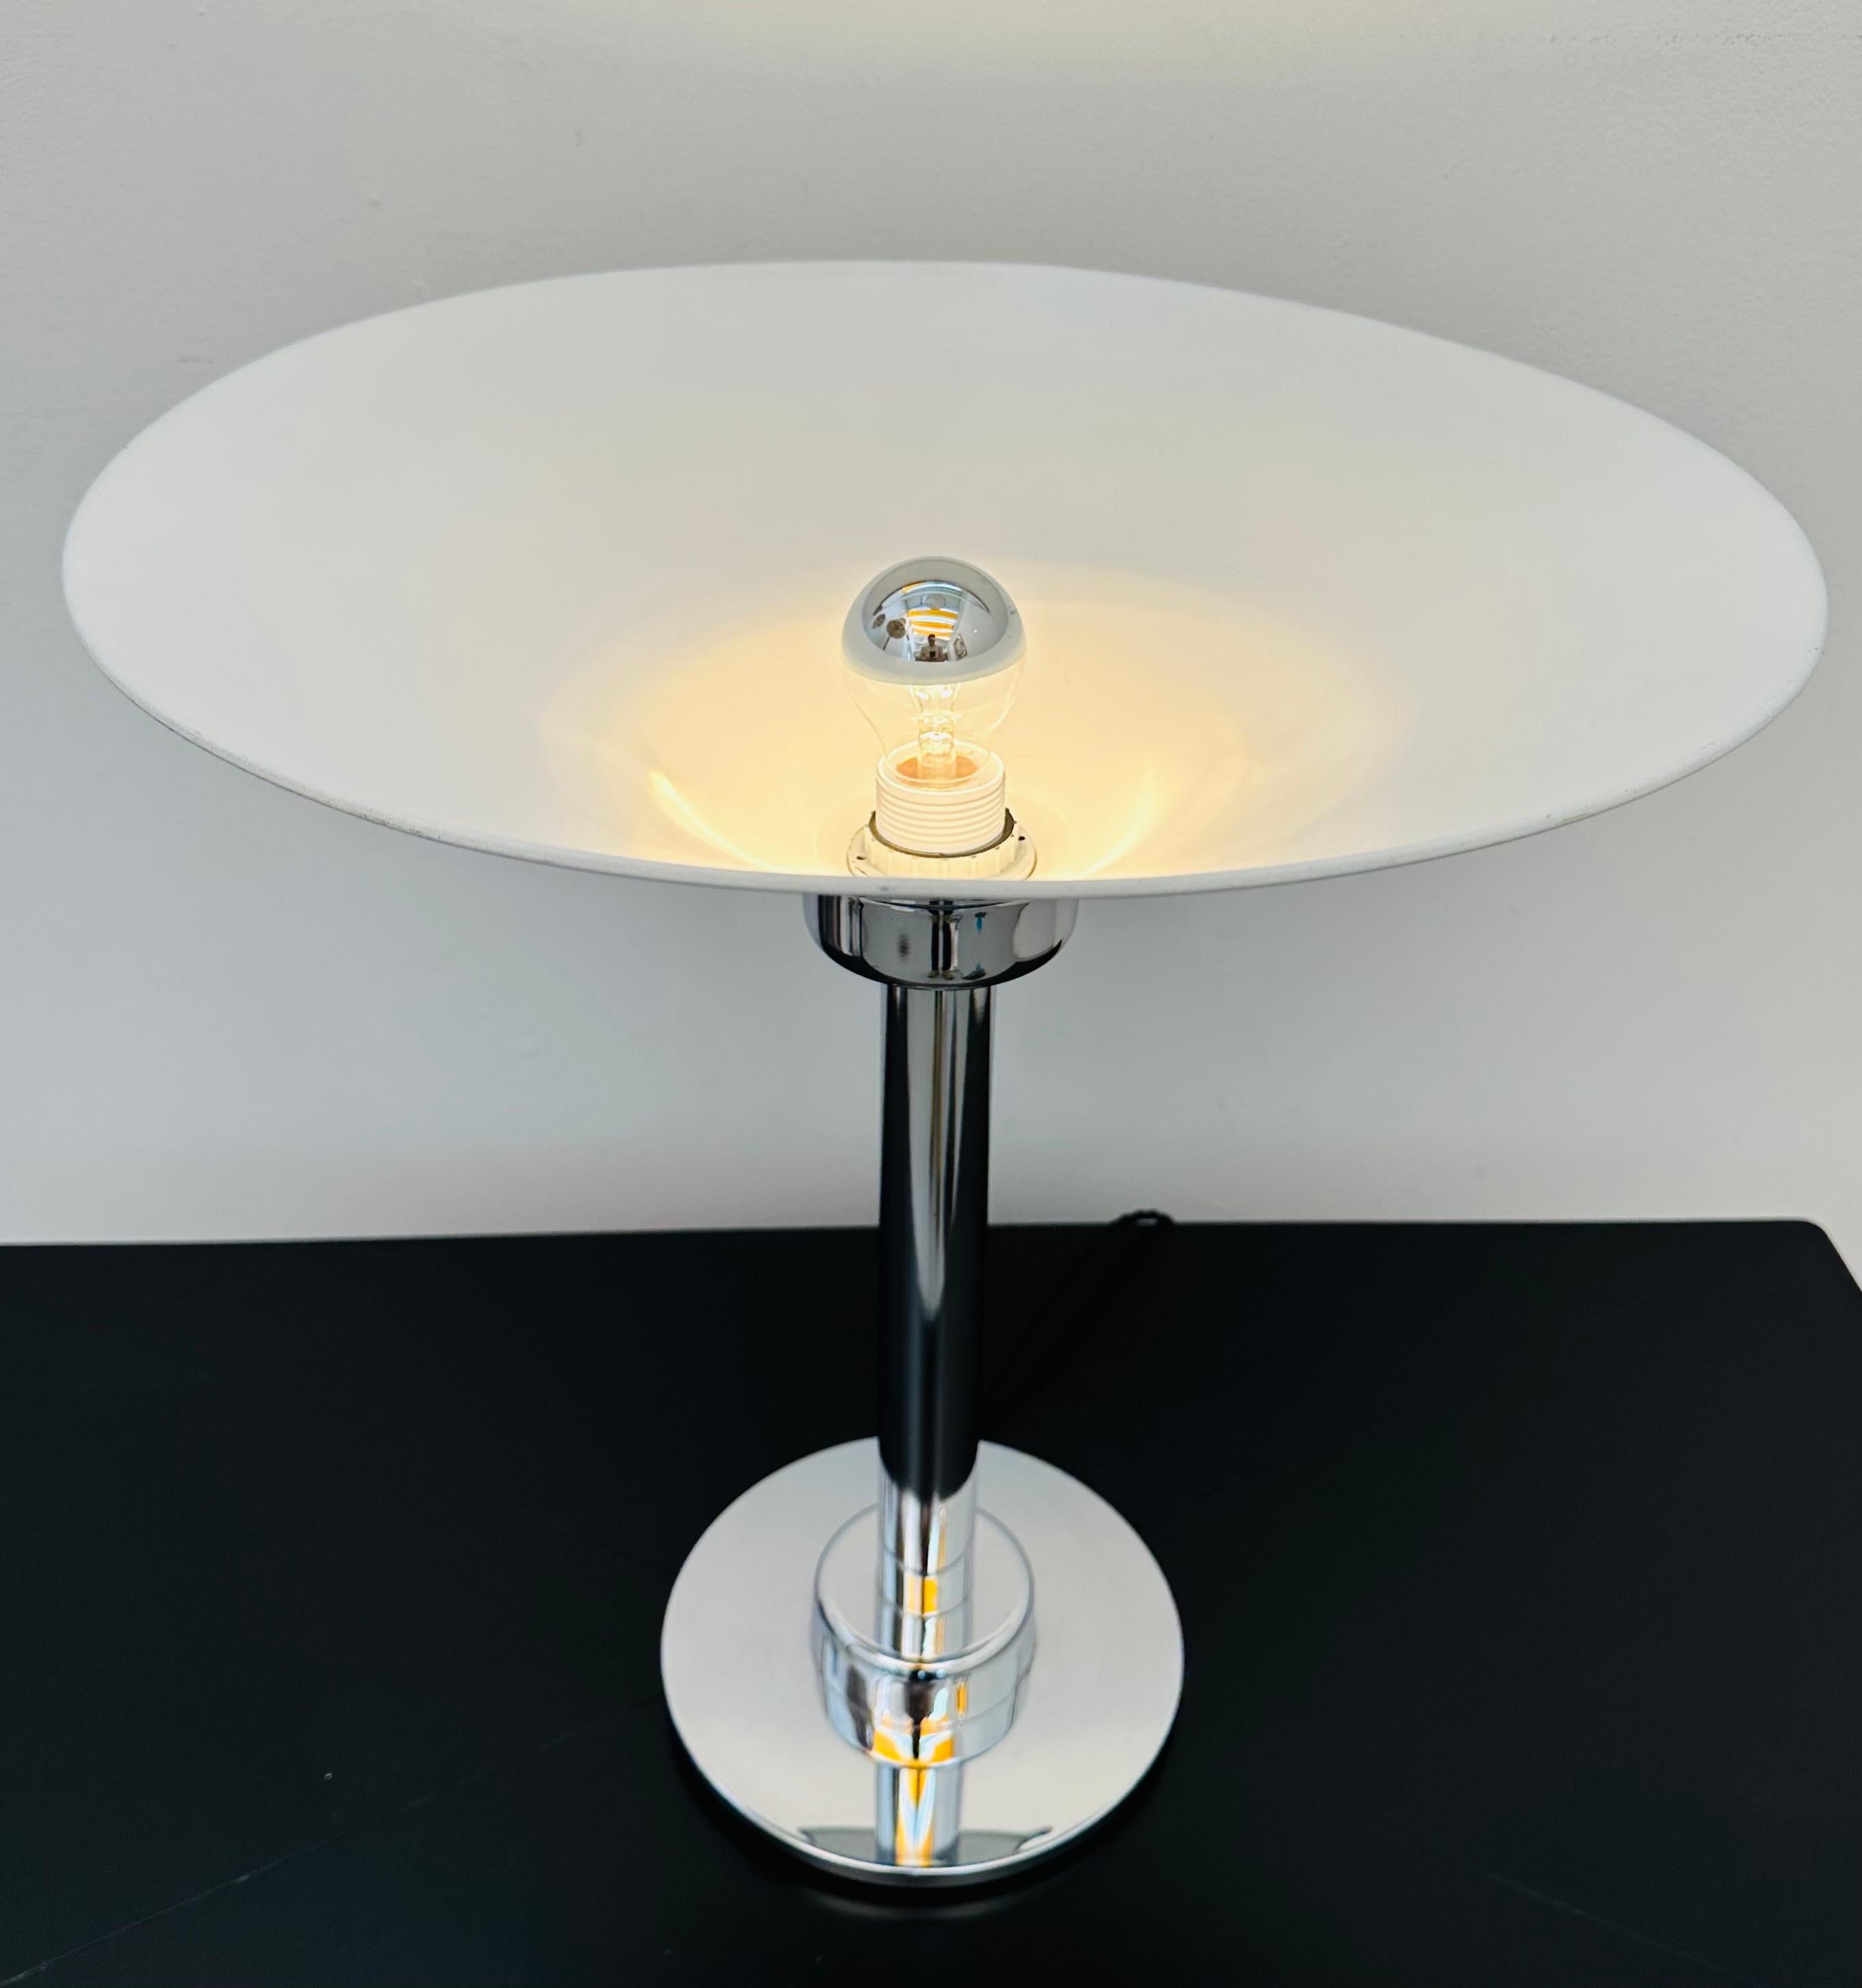 Space Age 1970s Italian Conical Enamelled White Metal & Chrome Uplighter Table Lamp For Sale